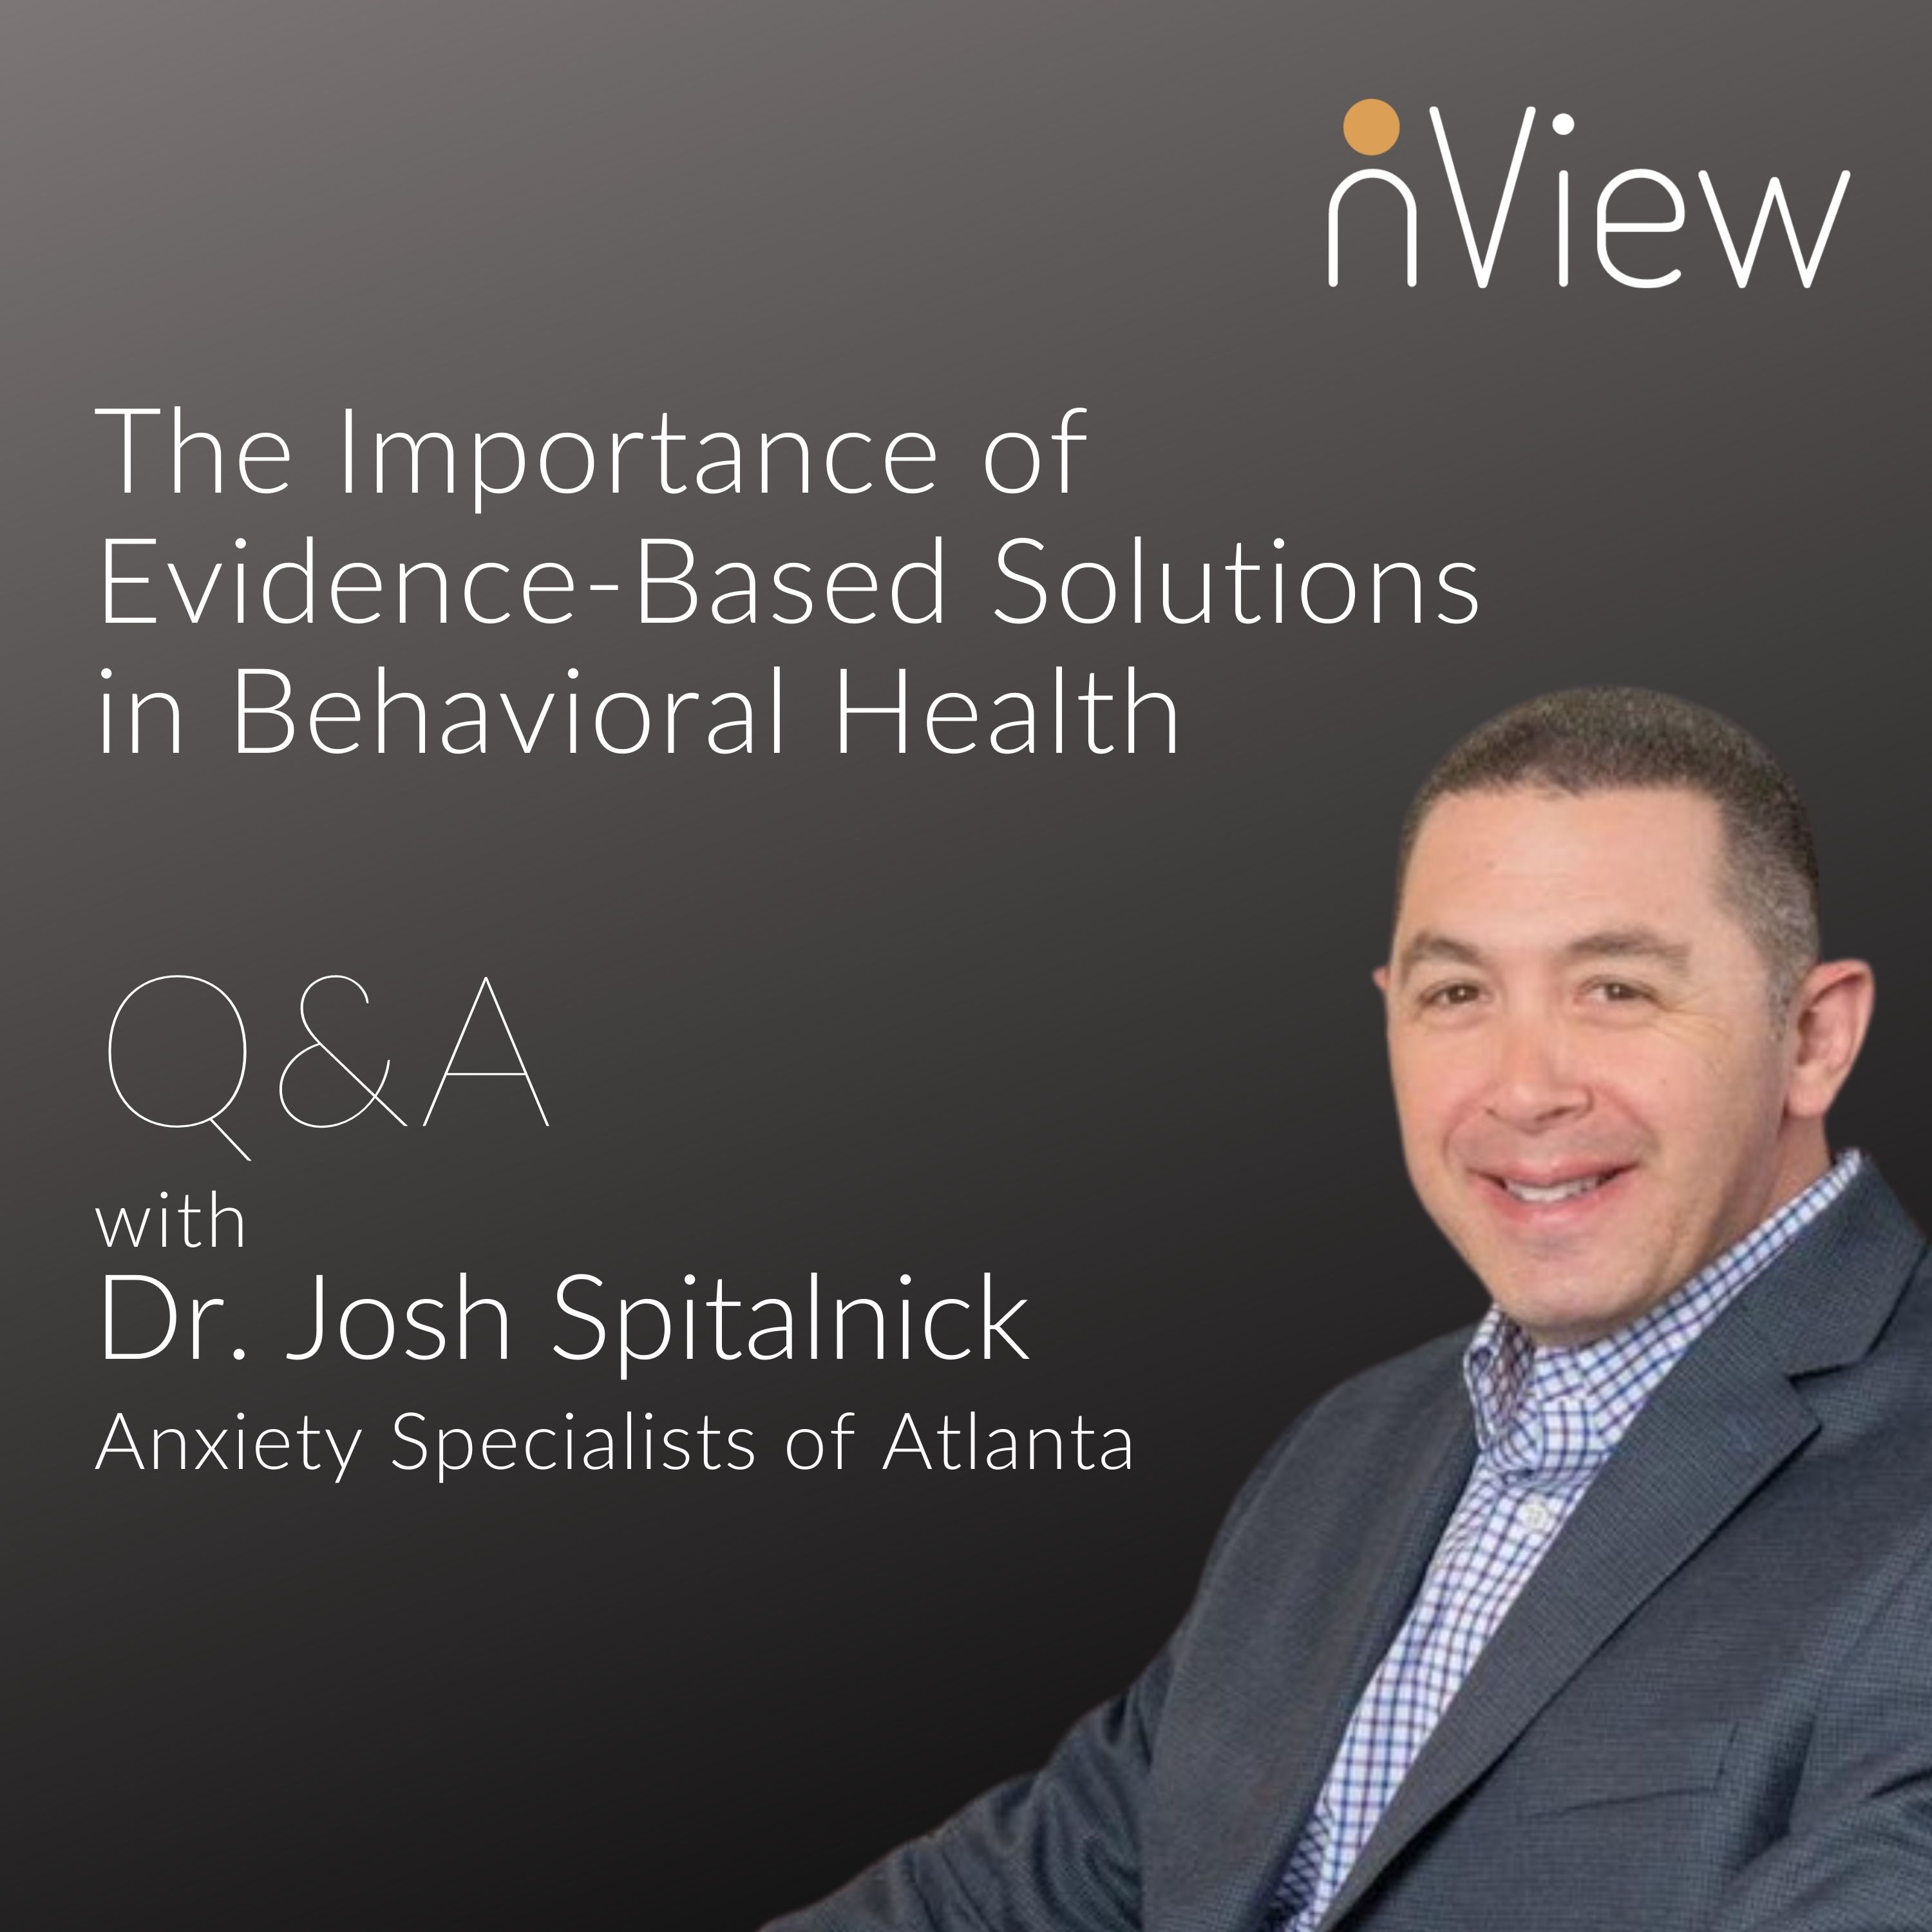 The Importance of Evidence-Based Solutions in Behavioral Health: Q&A With Dr. Josh Spitalnick